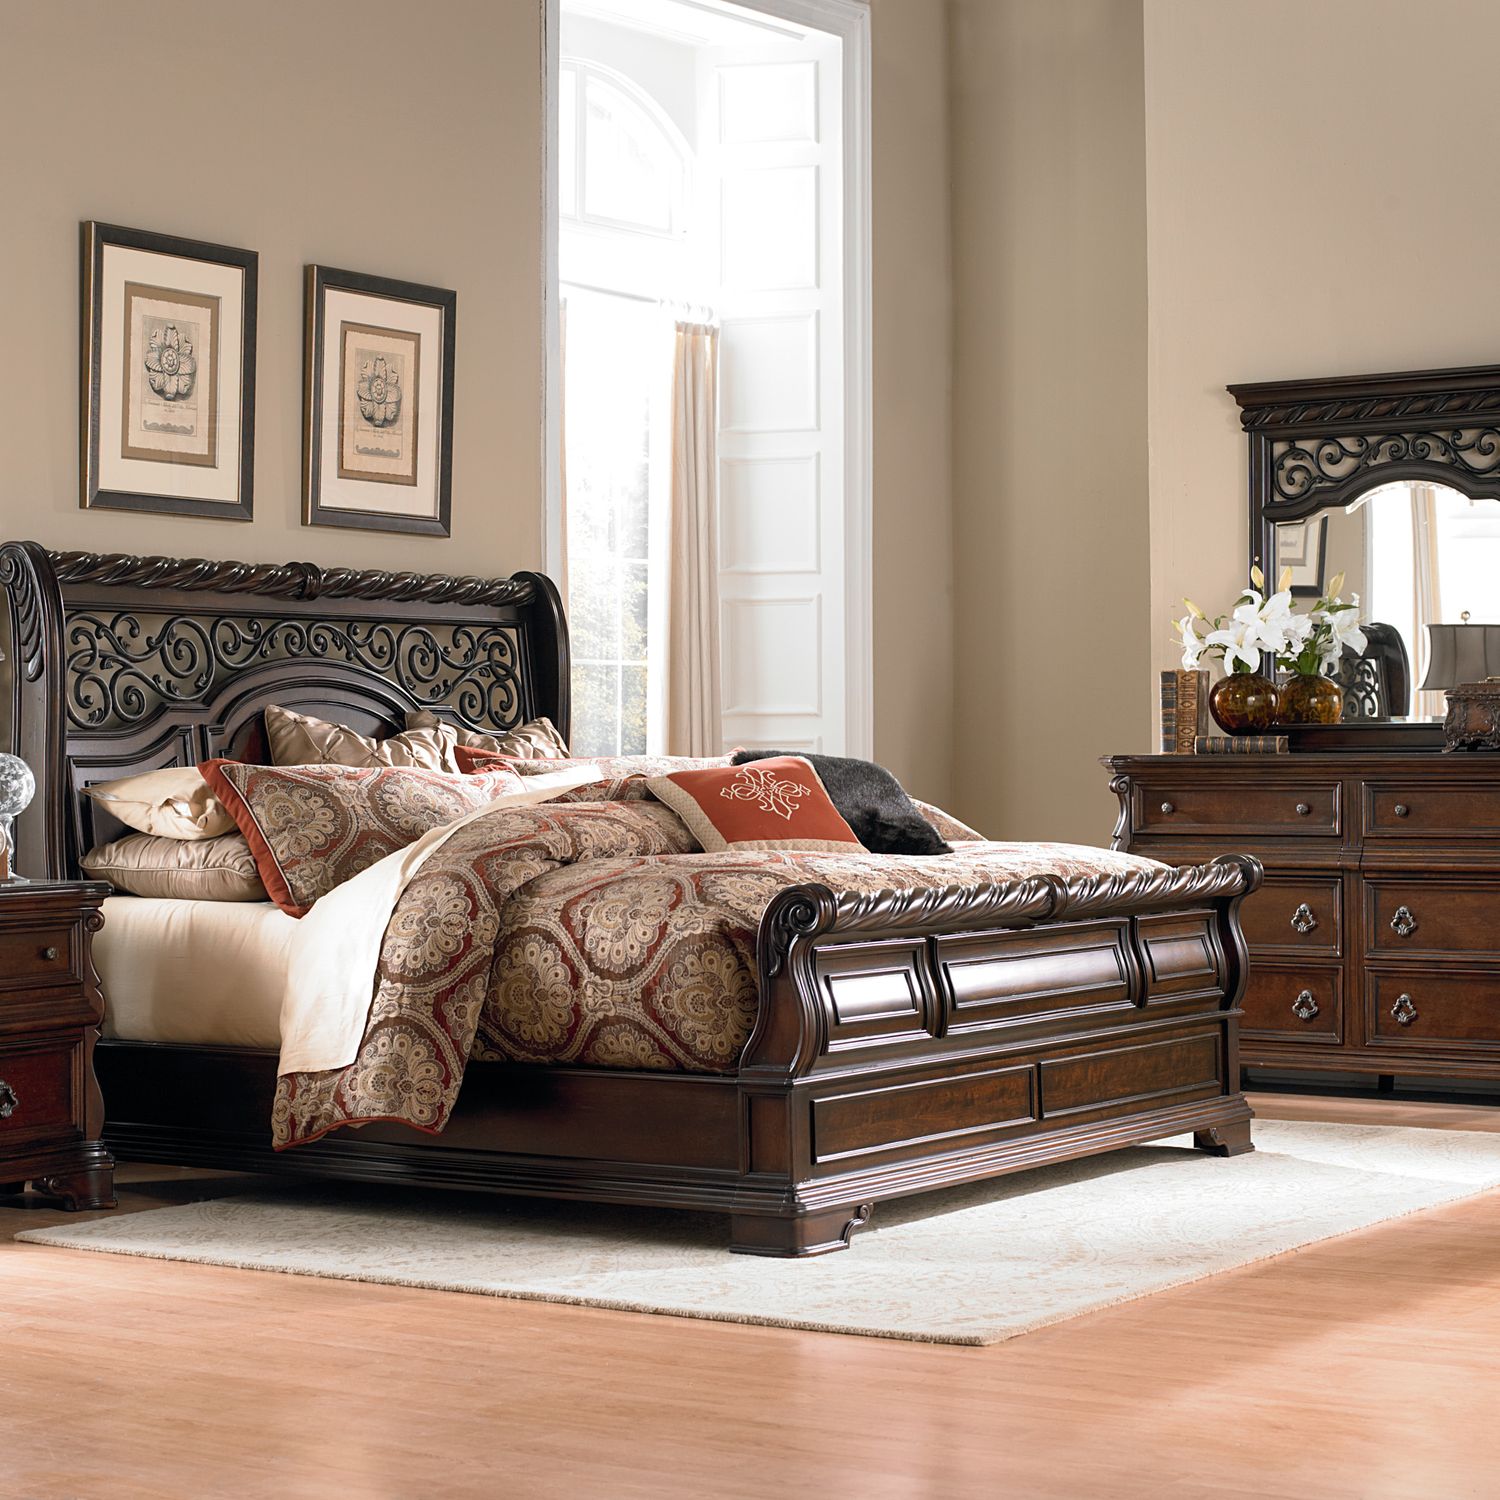 Arbor Place 575-BR Bedroom Collection from Liberty Furniture